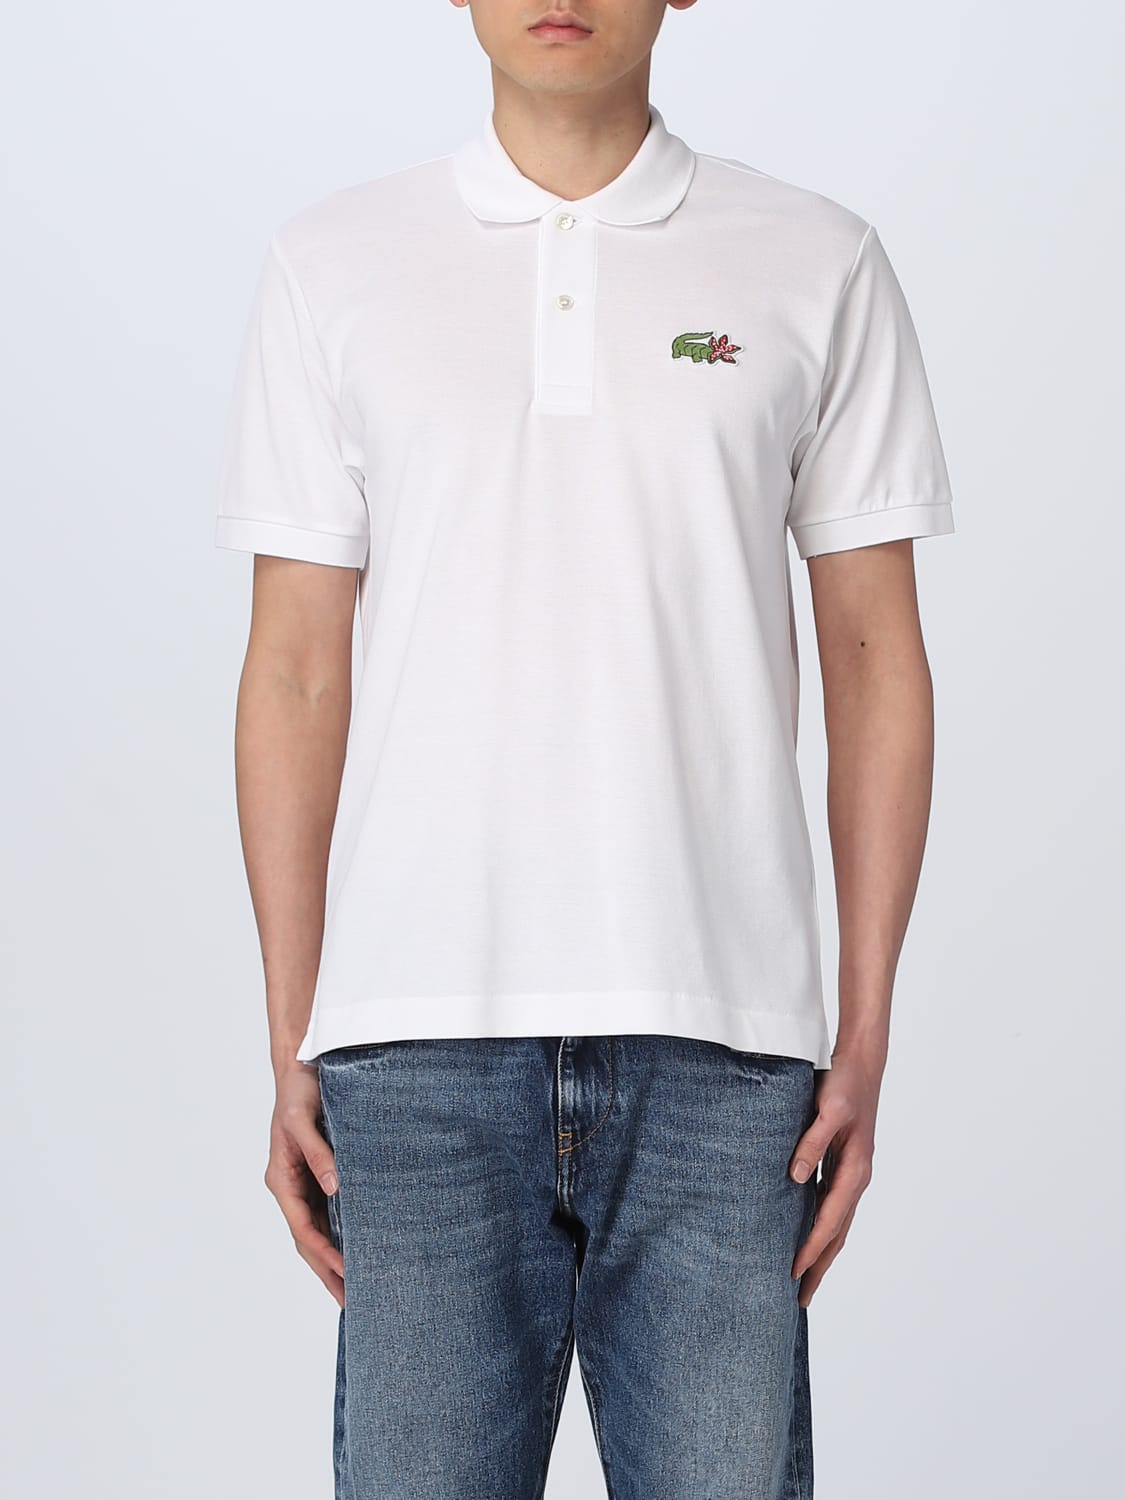 LACOSTE X NETFLIX: polo shirt for man - | Lacoste X Netflix polo shirt online at